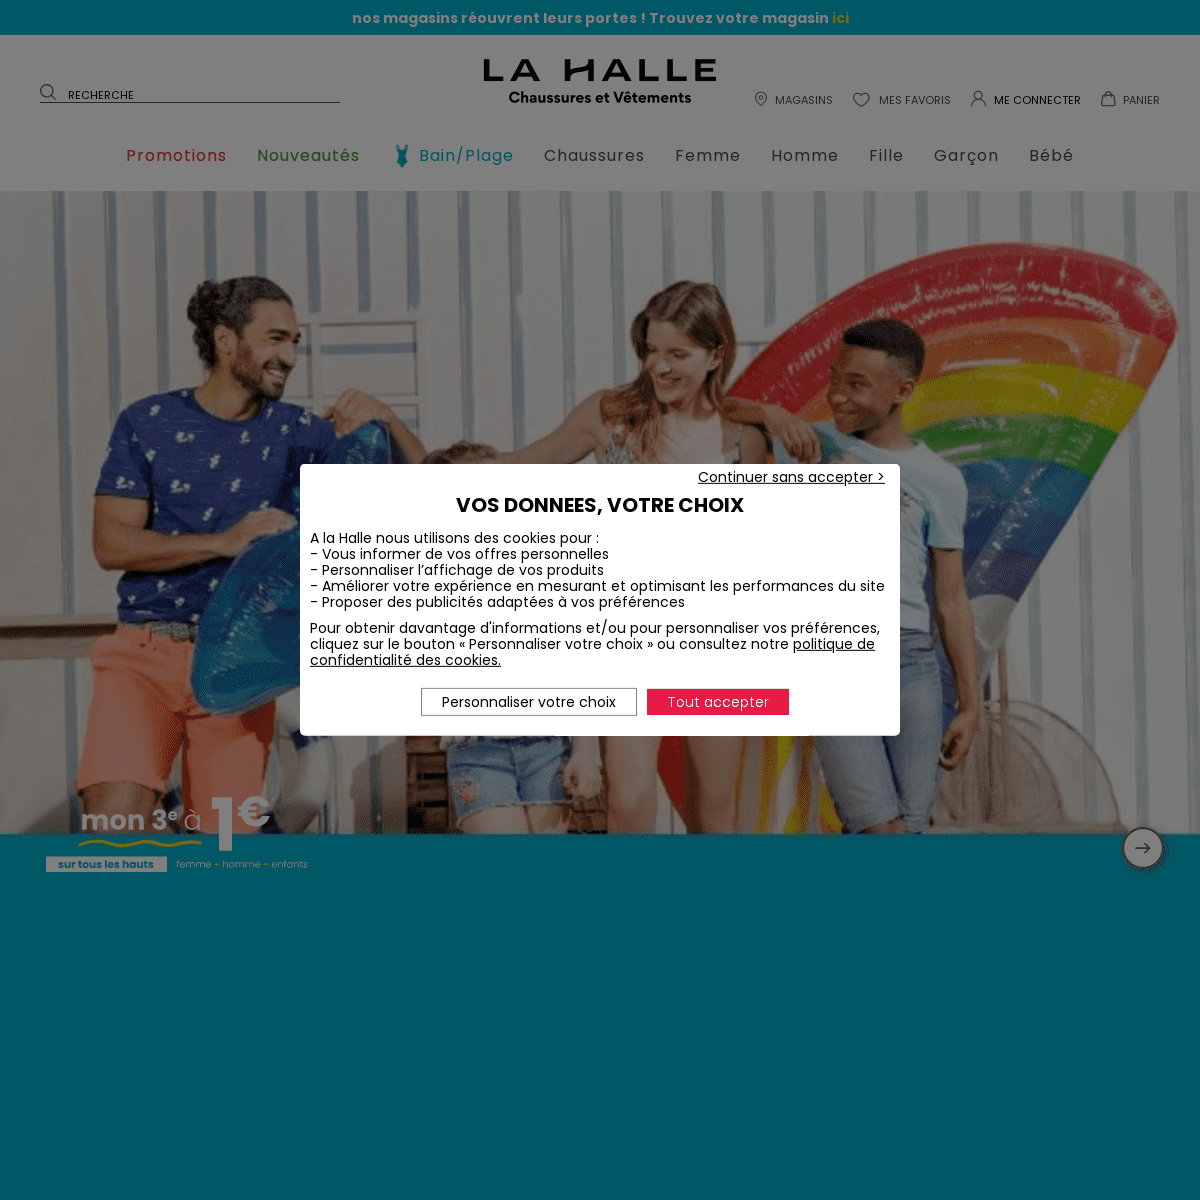 A complete backup of https://lahalle.com